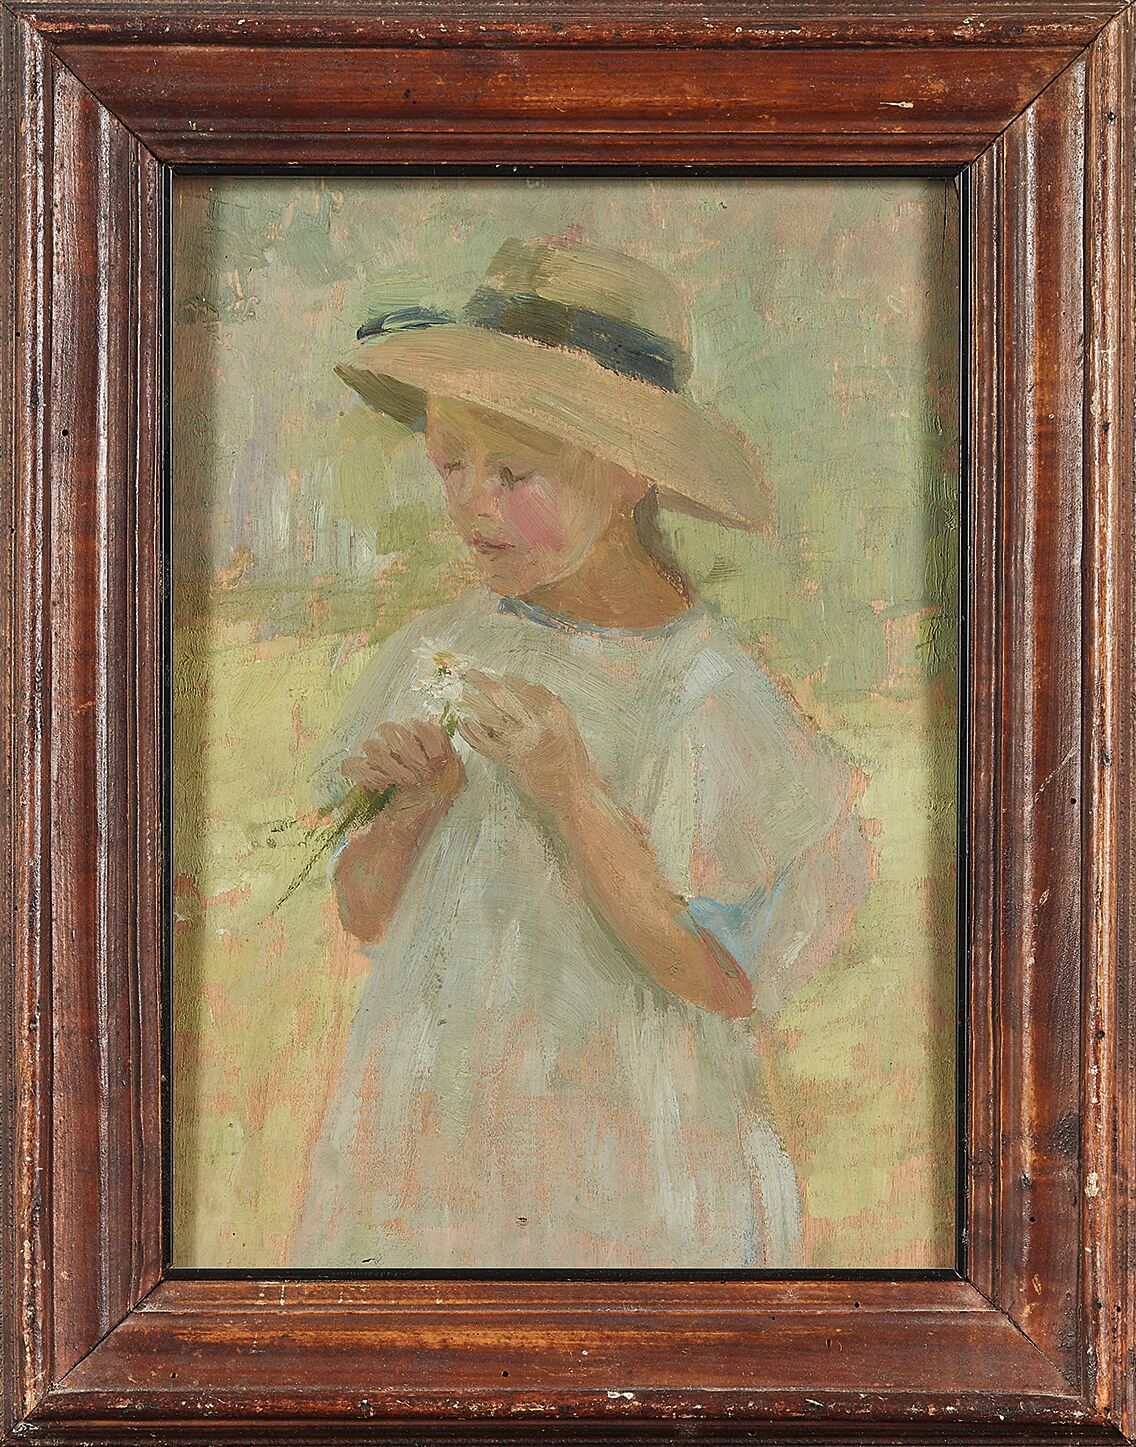 Null Alys PRAT (1886-1924)
Girl thinning out a daisy
Oil on panel.
33 x 23,5 cm